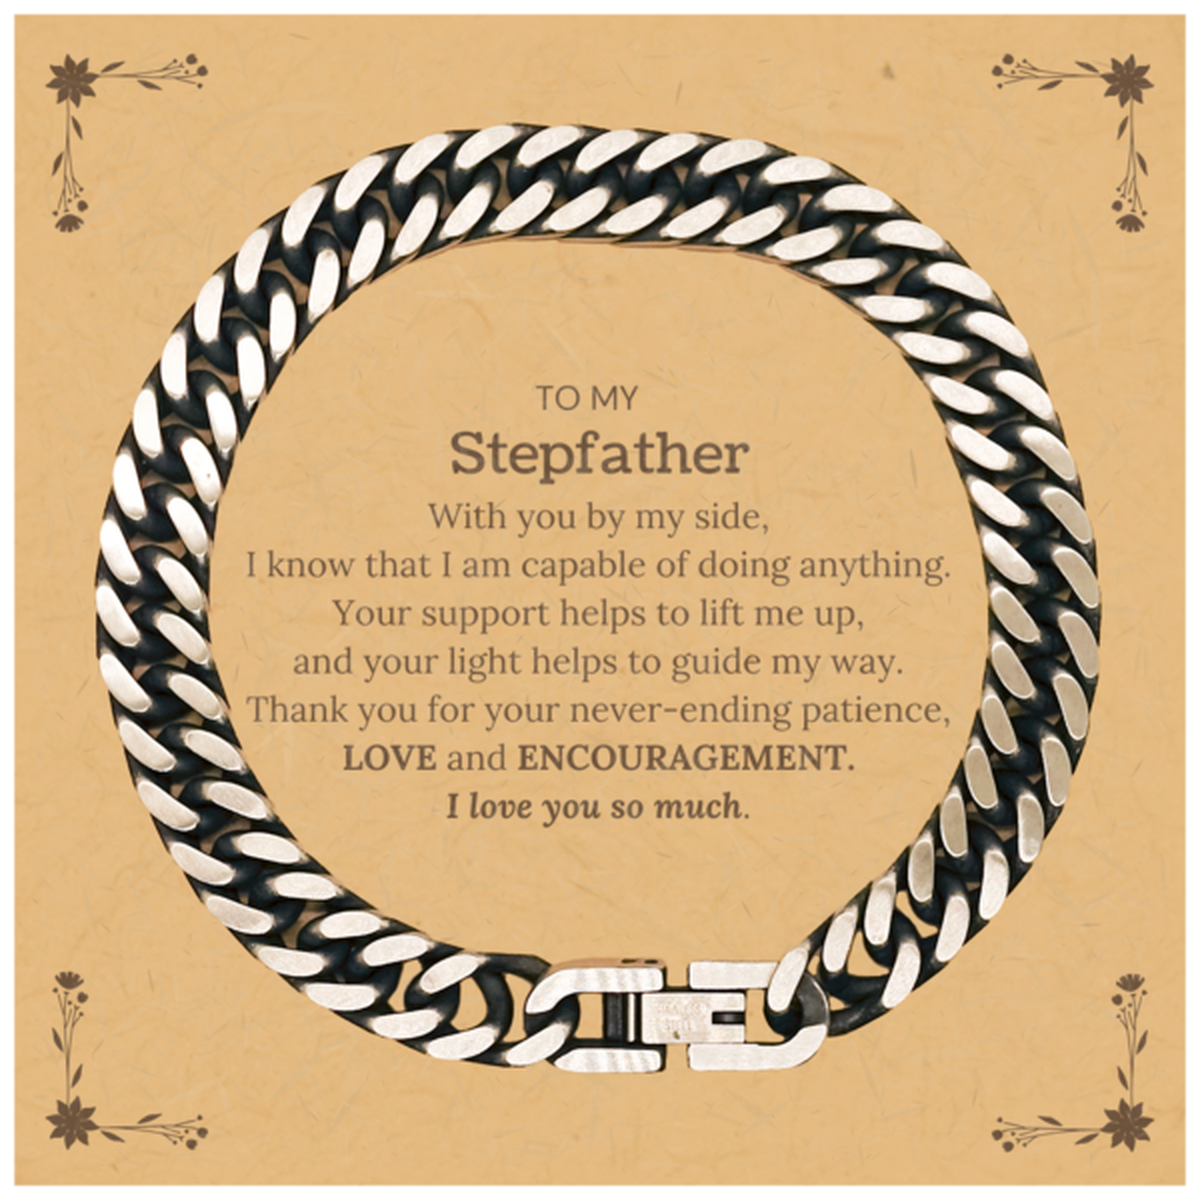 Appreciation Stepfather Cuban Link Chain Bracelet Gifts, To My Stepfather Birthday Christmas Wedding Keepsake Gifts for Stepfather With you by my side, I know that I am capable of doing anything. I love you so much